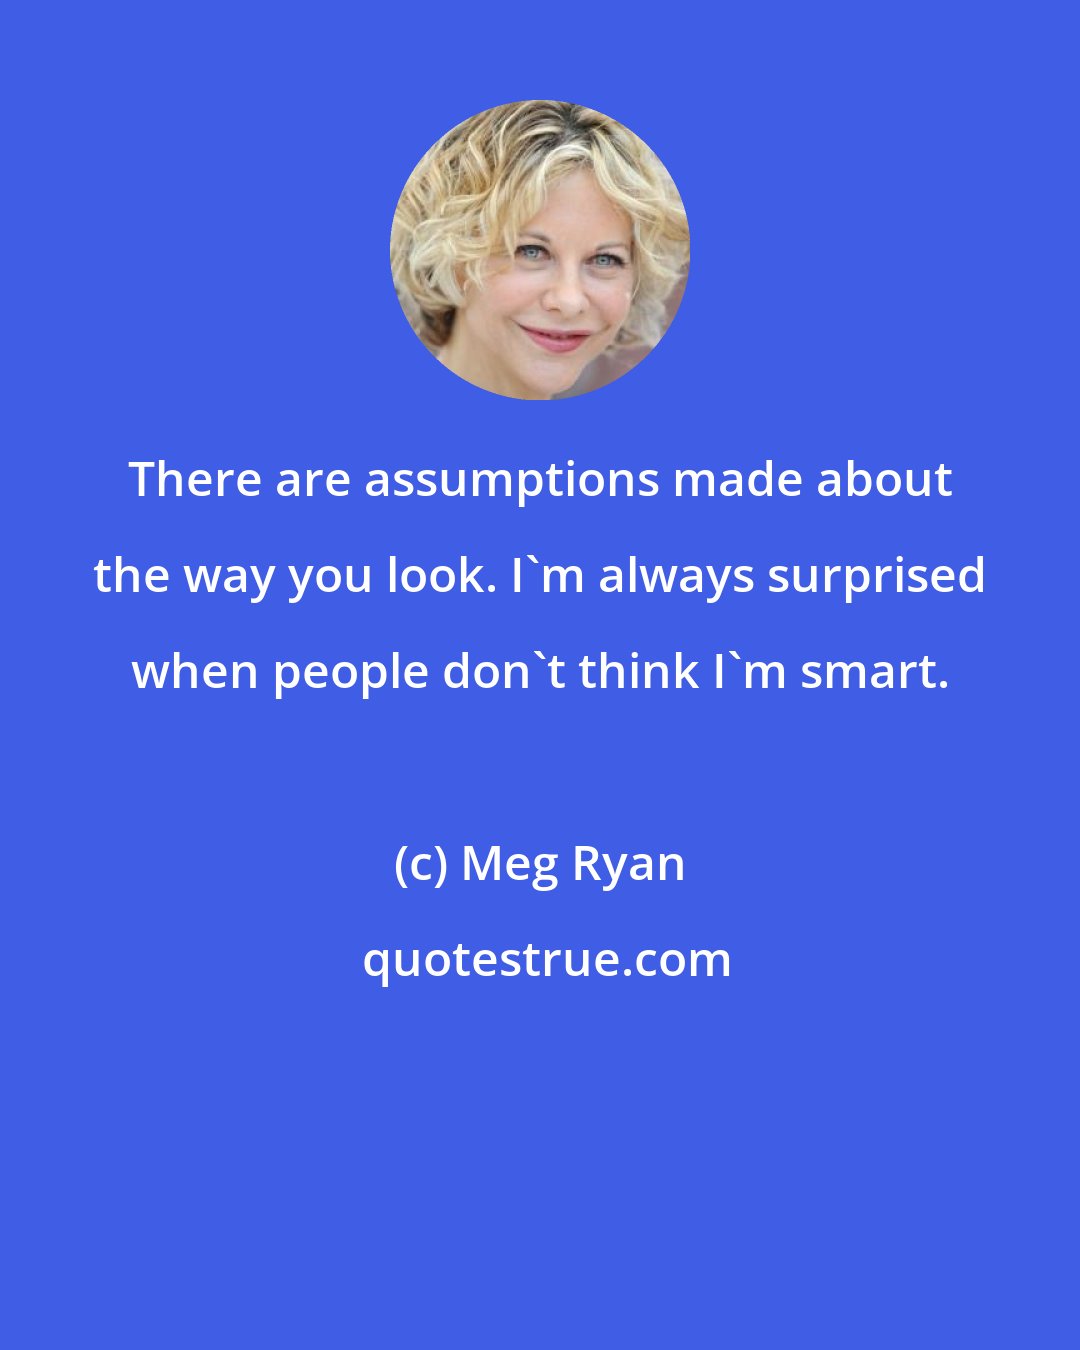 Meg Ryan: There are assumptions made about the way you look. I'm always surprised when people don't think I'm smart.